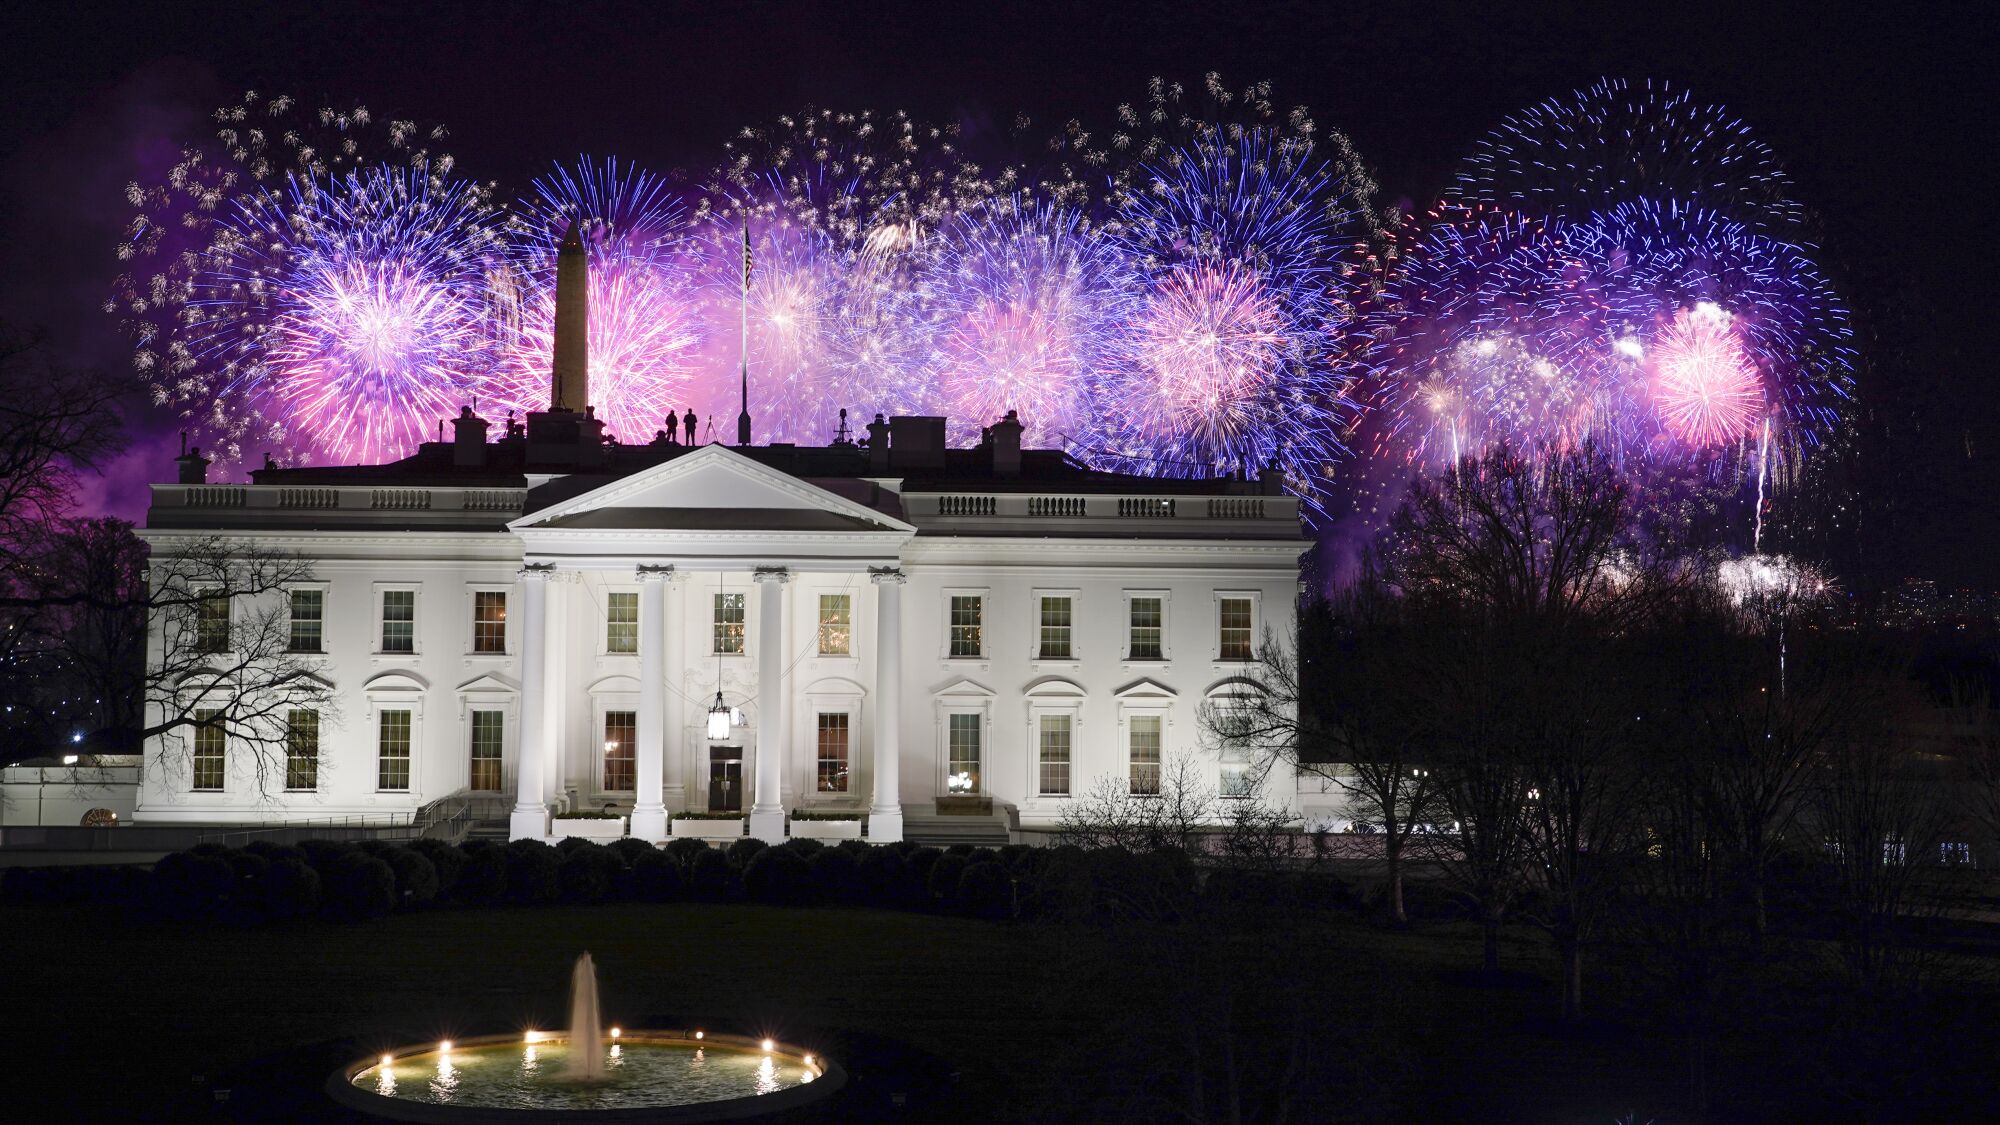 Fireworks are displayed over the White House as part of Inauguration Day ceremonies.